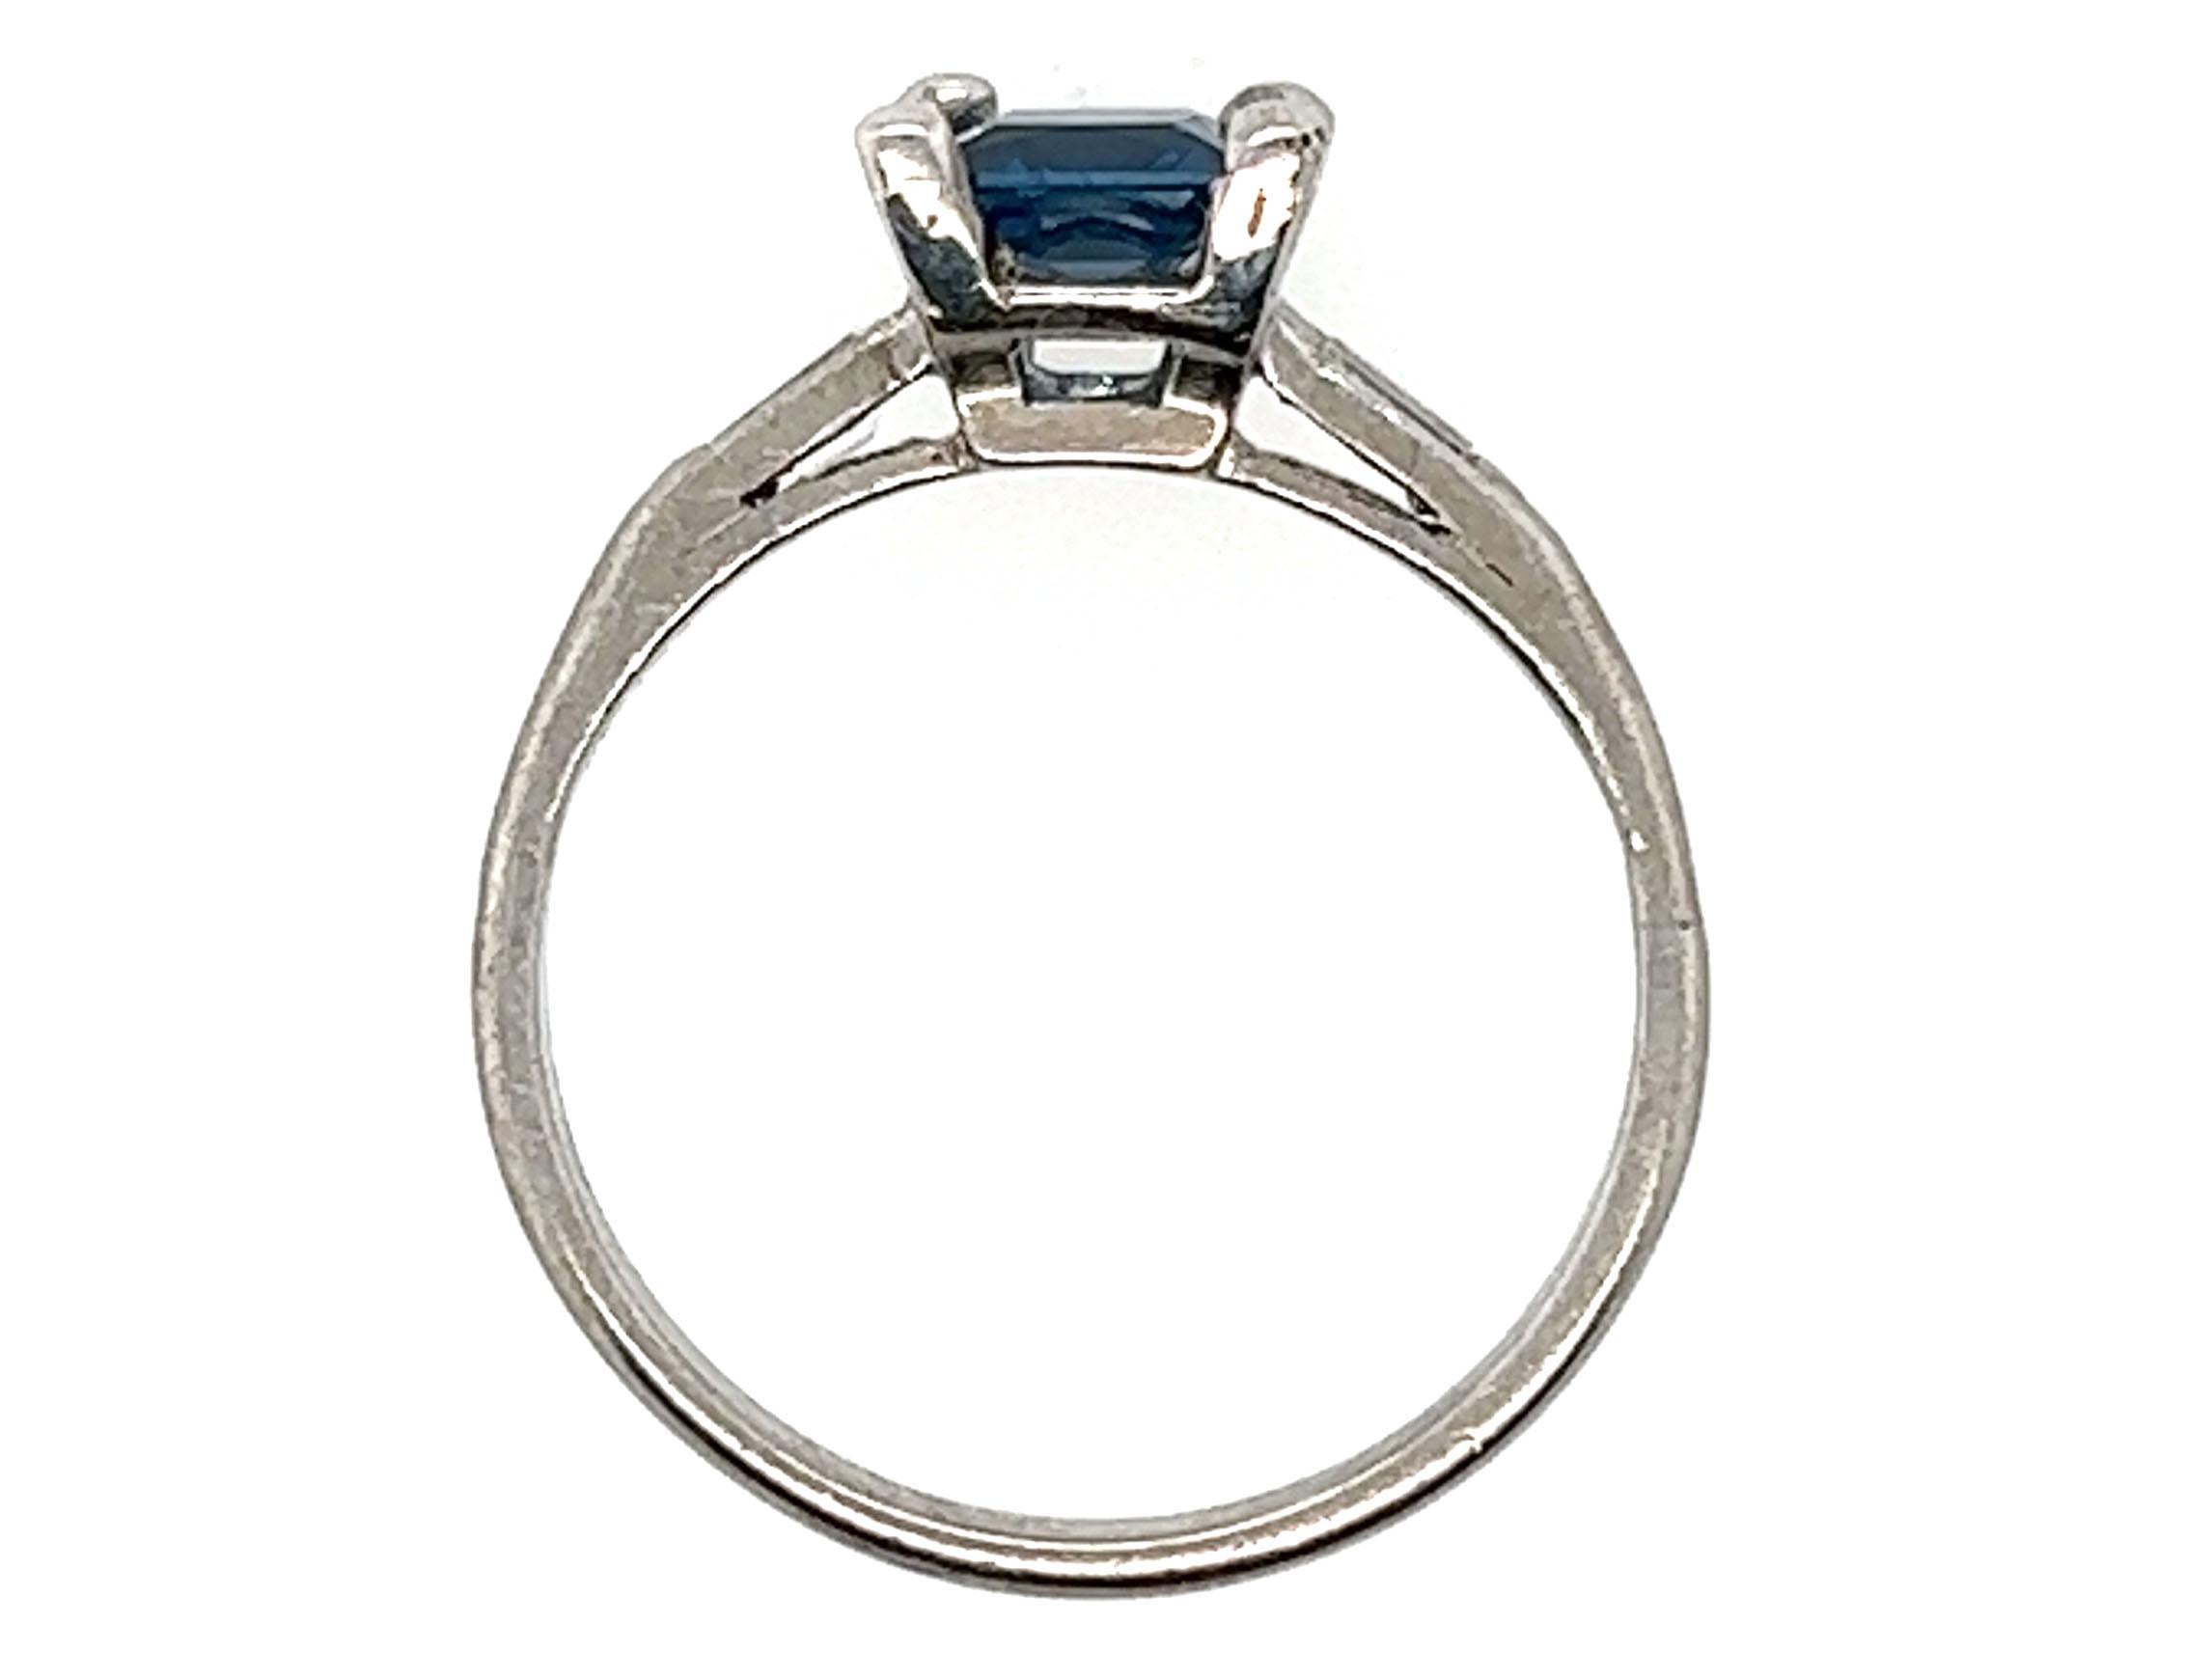 Genuine Original Antique from 1930's-1940's .96ct Sapphire Diamond Platinum Art Deco Engagement Ring



Featuring a Stunning .86ct Genuine Natural Blue Square Sapphire Center

Possibly a Ceylon or Kashmir Sapphire

Perfect for Women of All Ages